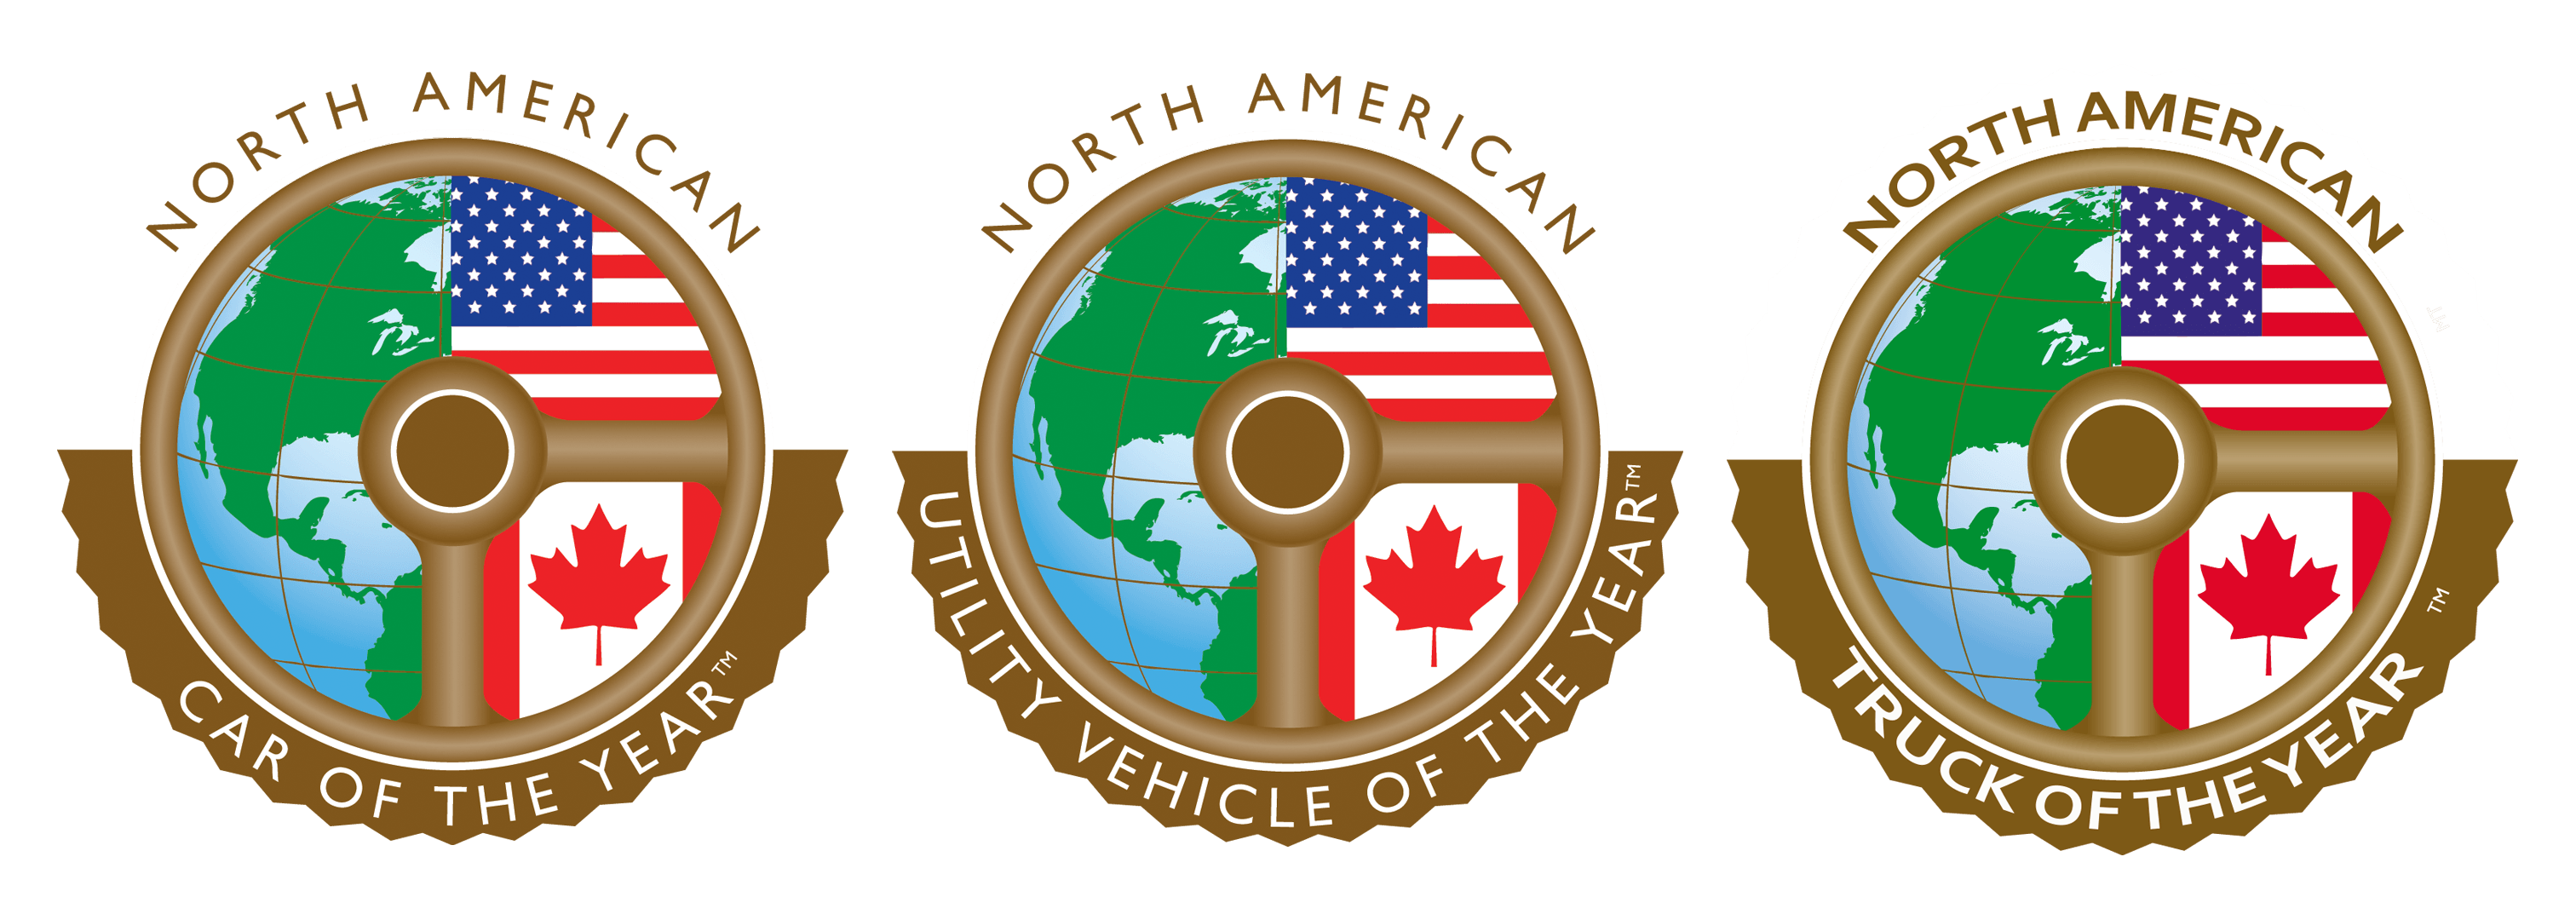 American Car Logo - North American Car Utility and Truck of the Year Winners Announced